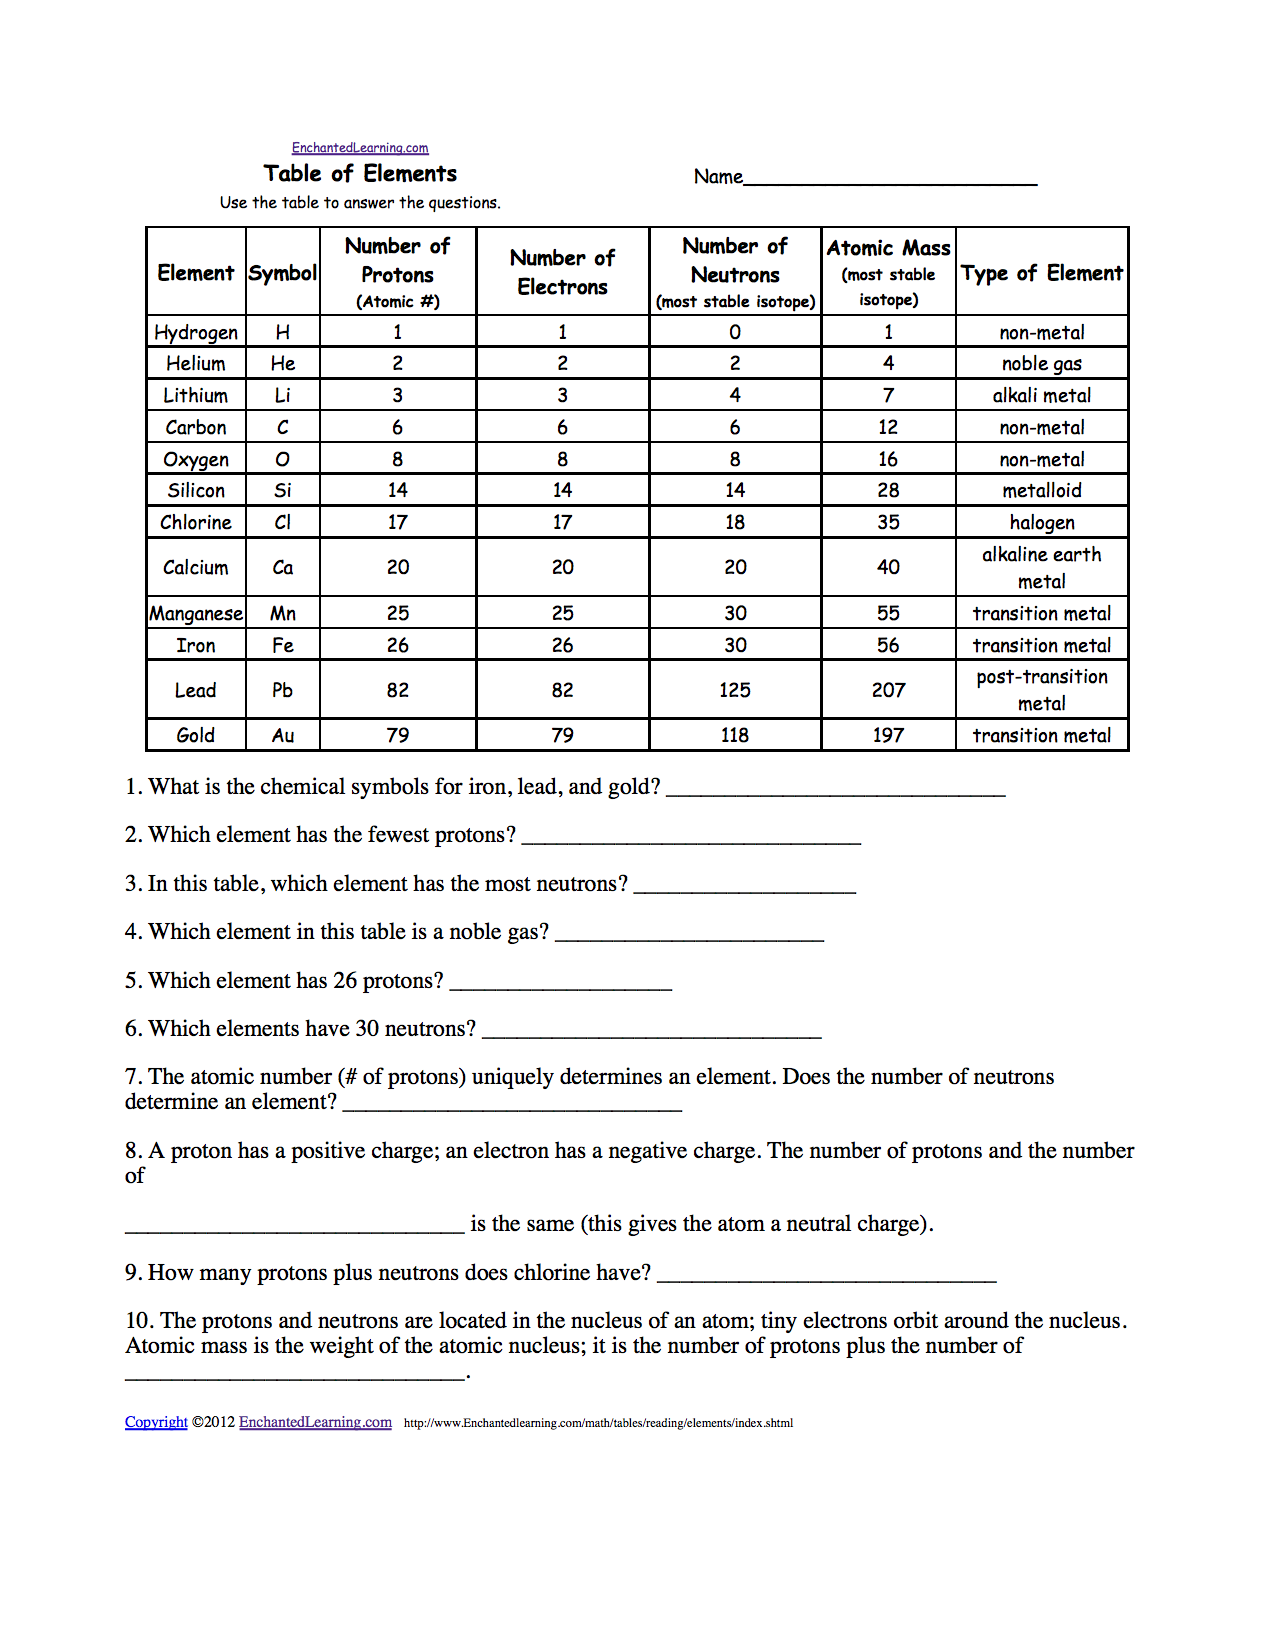 elements-and-their-symbols-worksheet